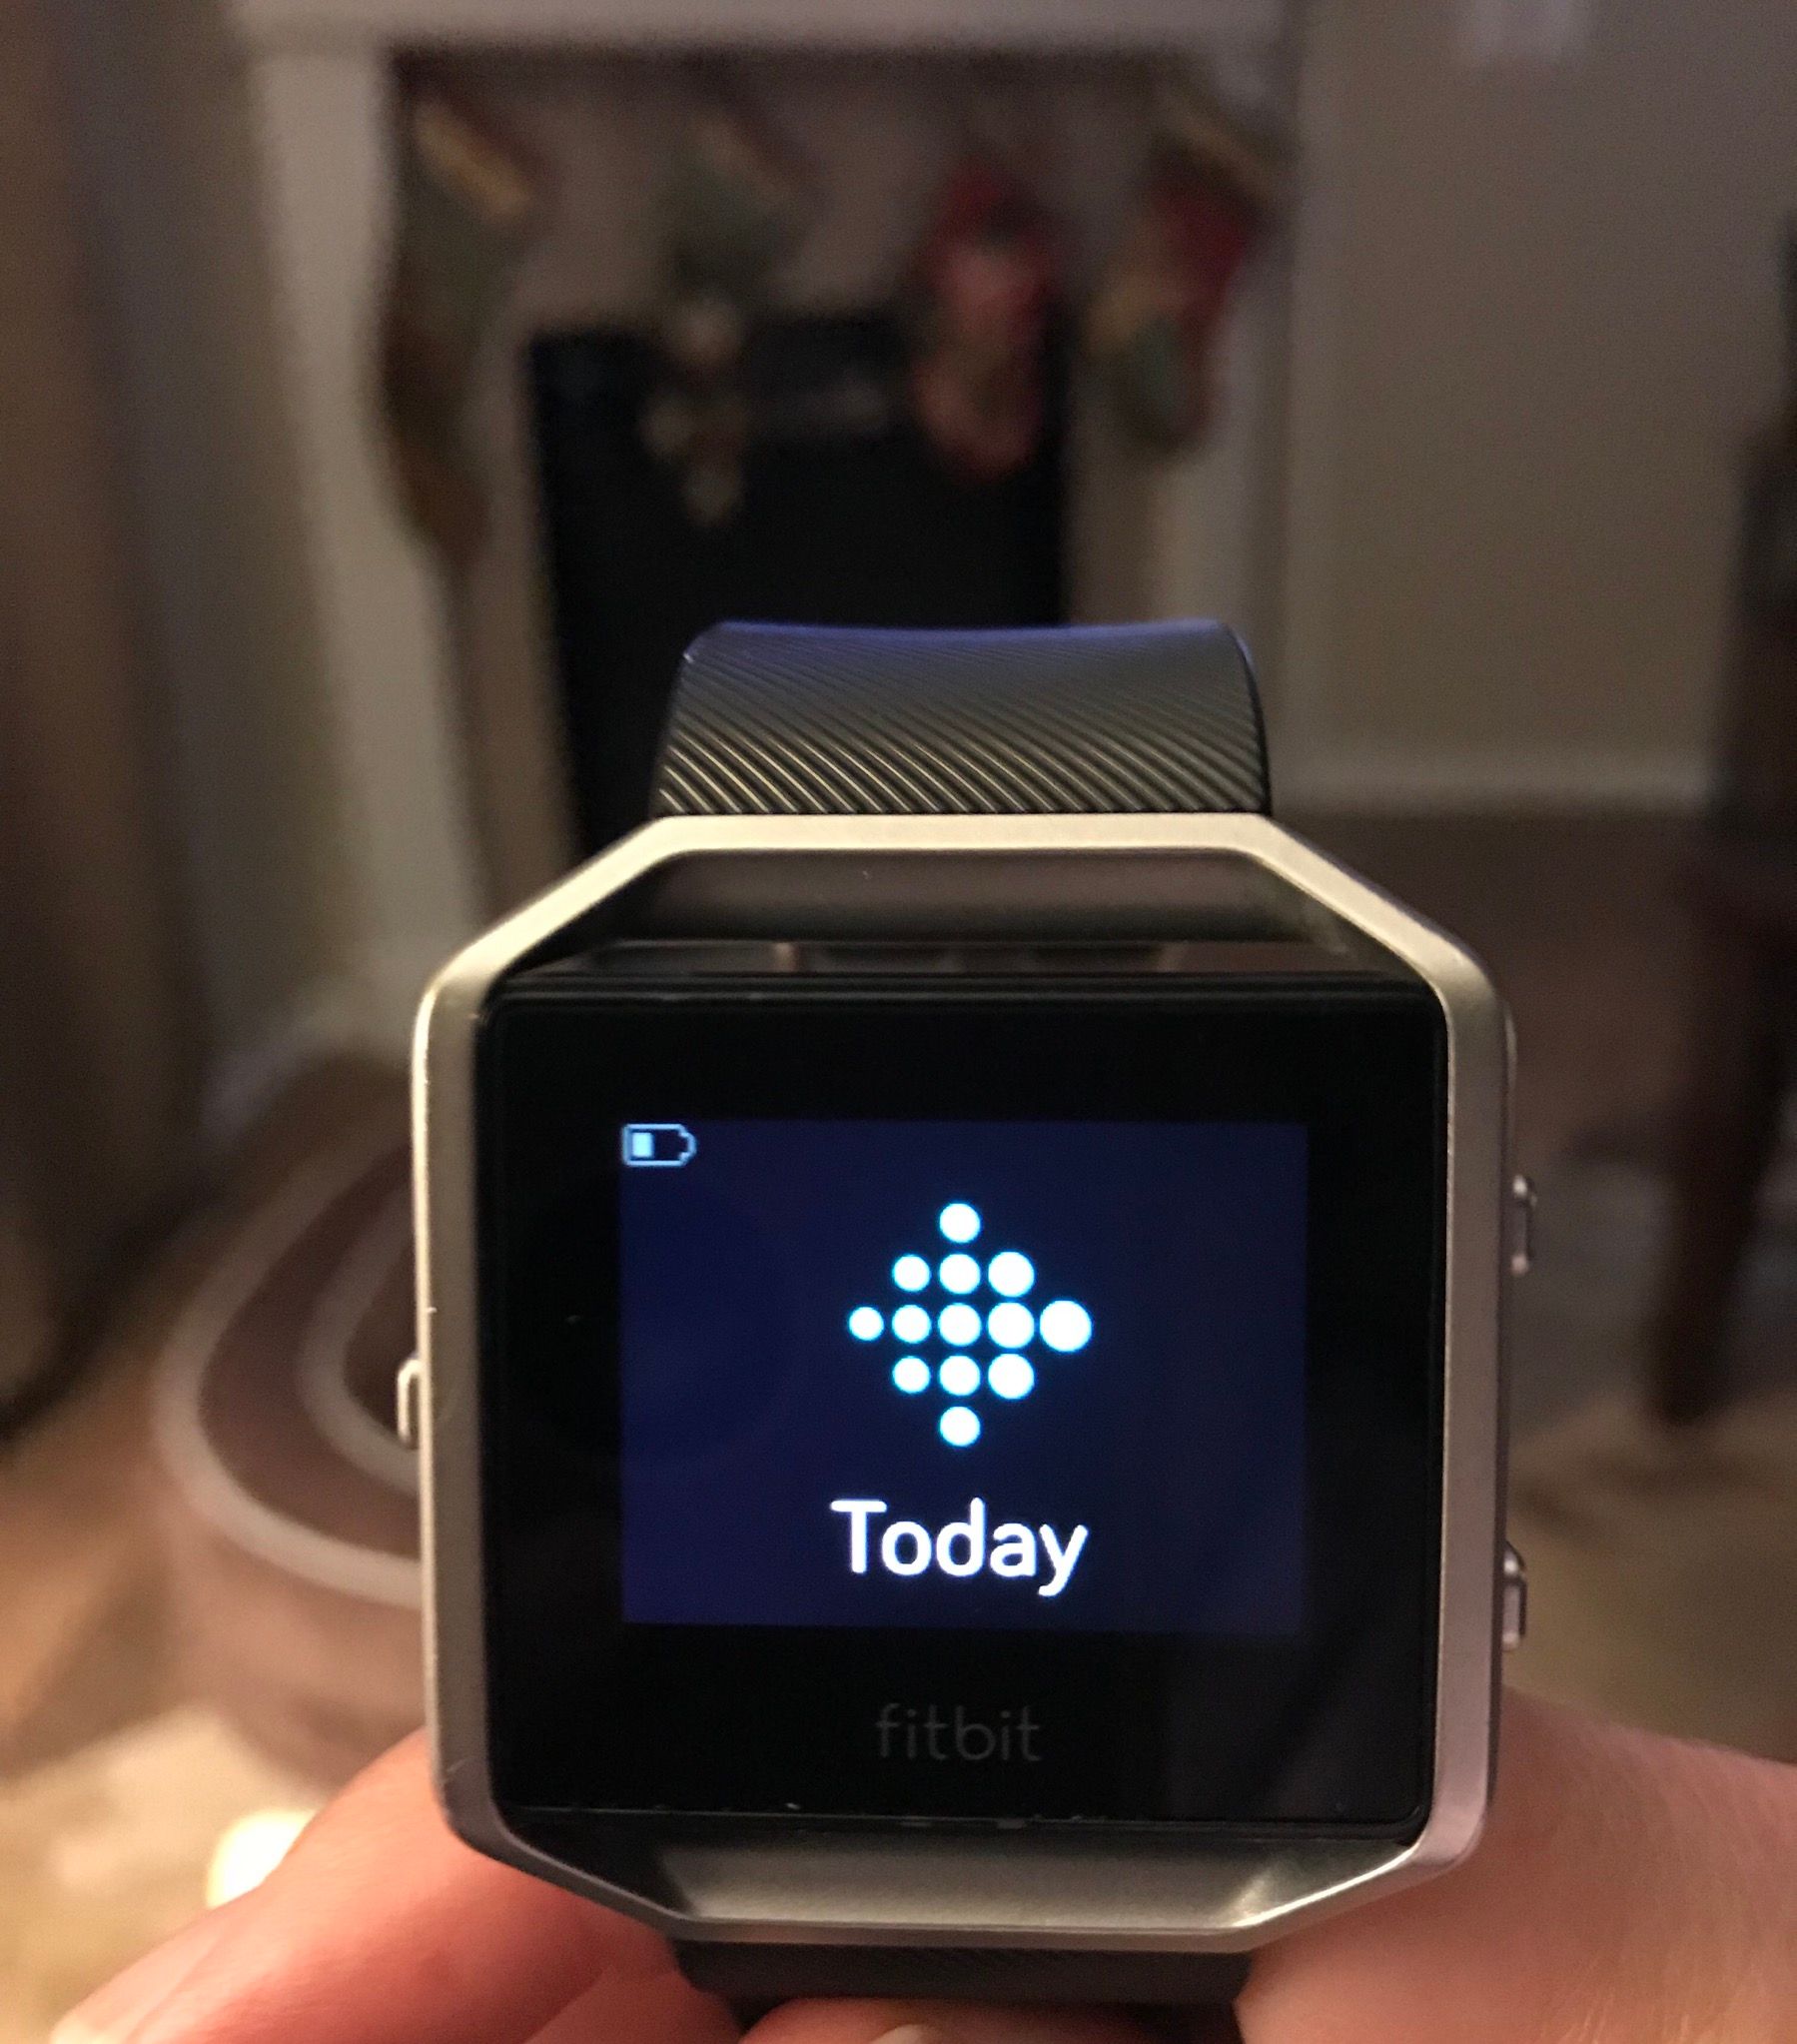 fitbit blaze stopped charging